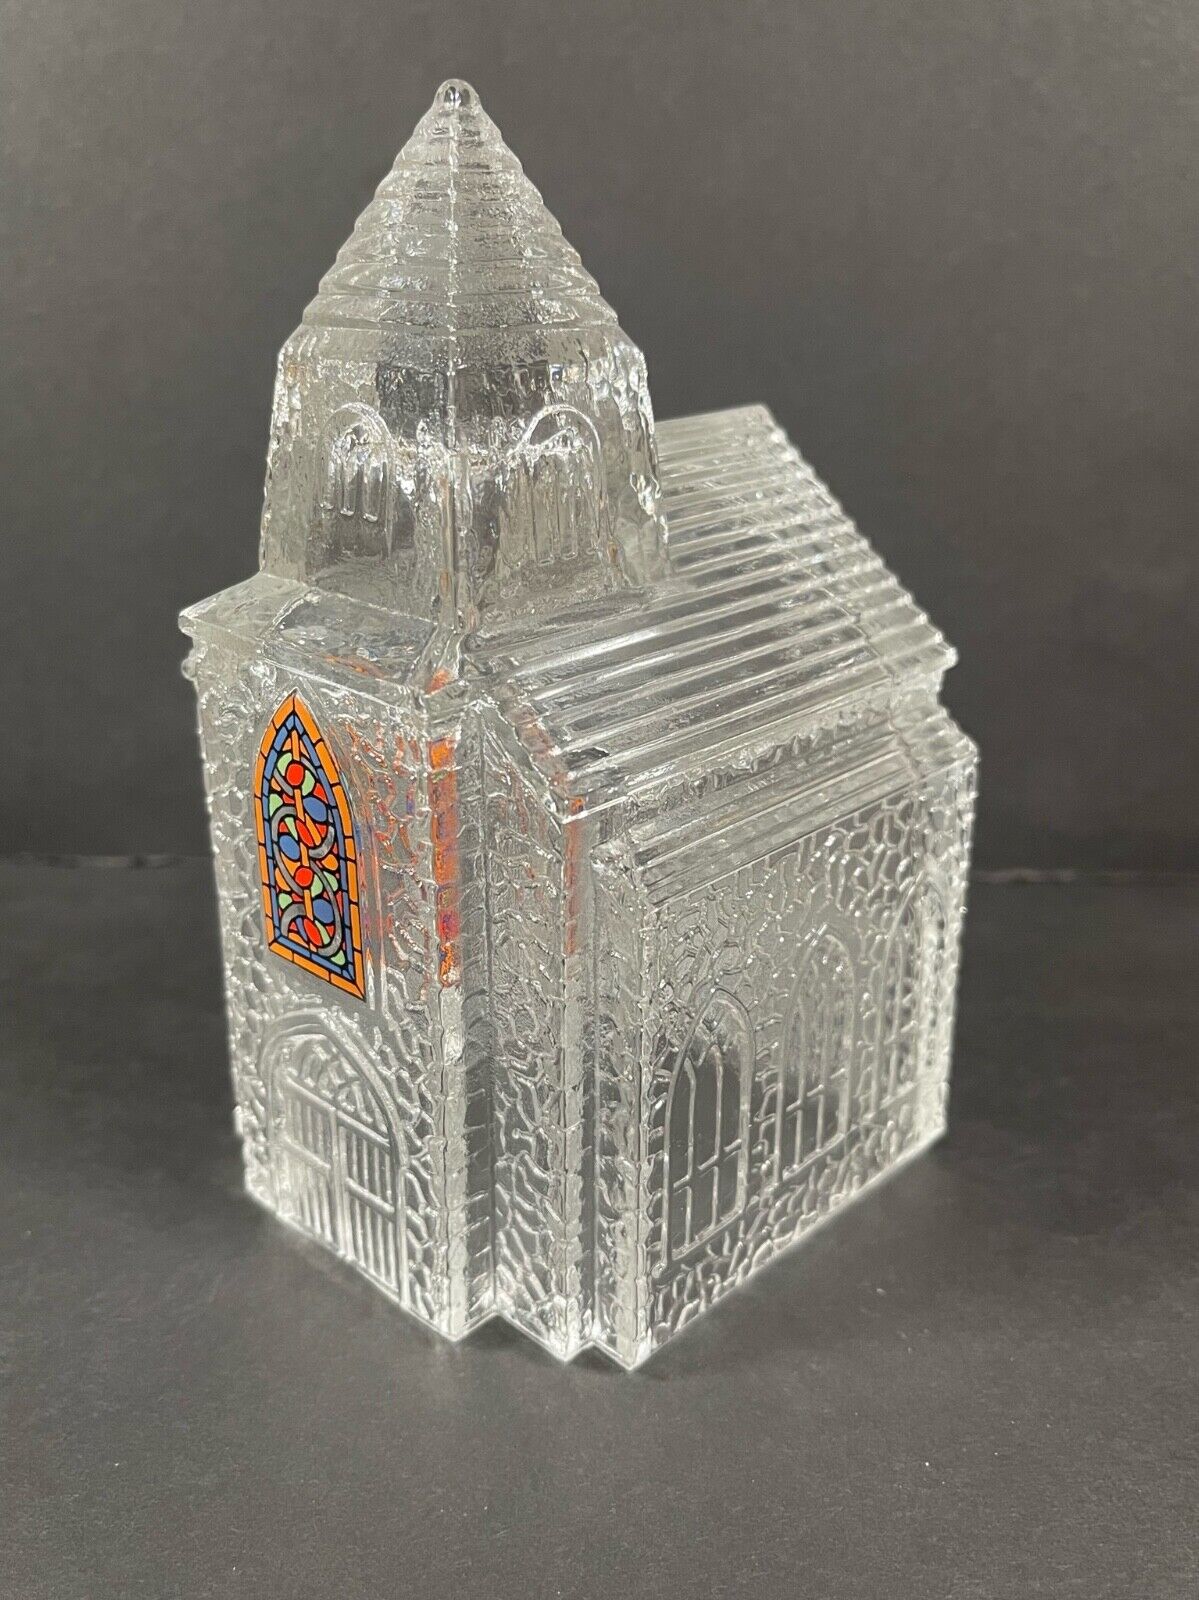 Church Tea Light Candle Holder 3”x 6” Cathedral Cover Etched Stained Glass Lamp